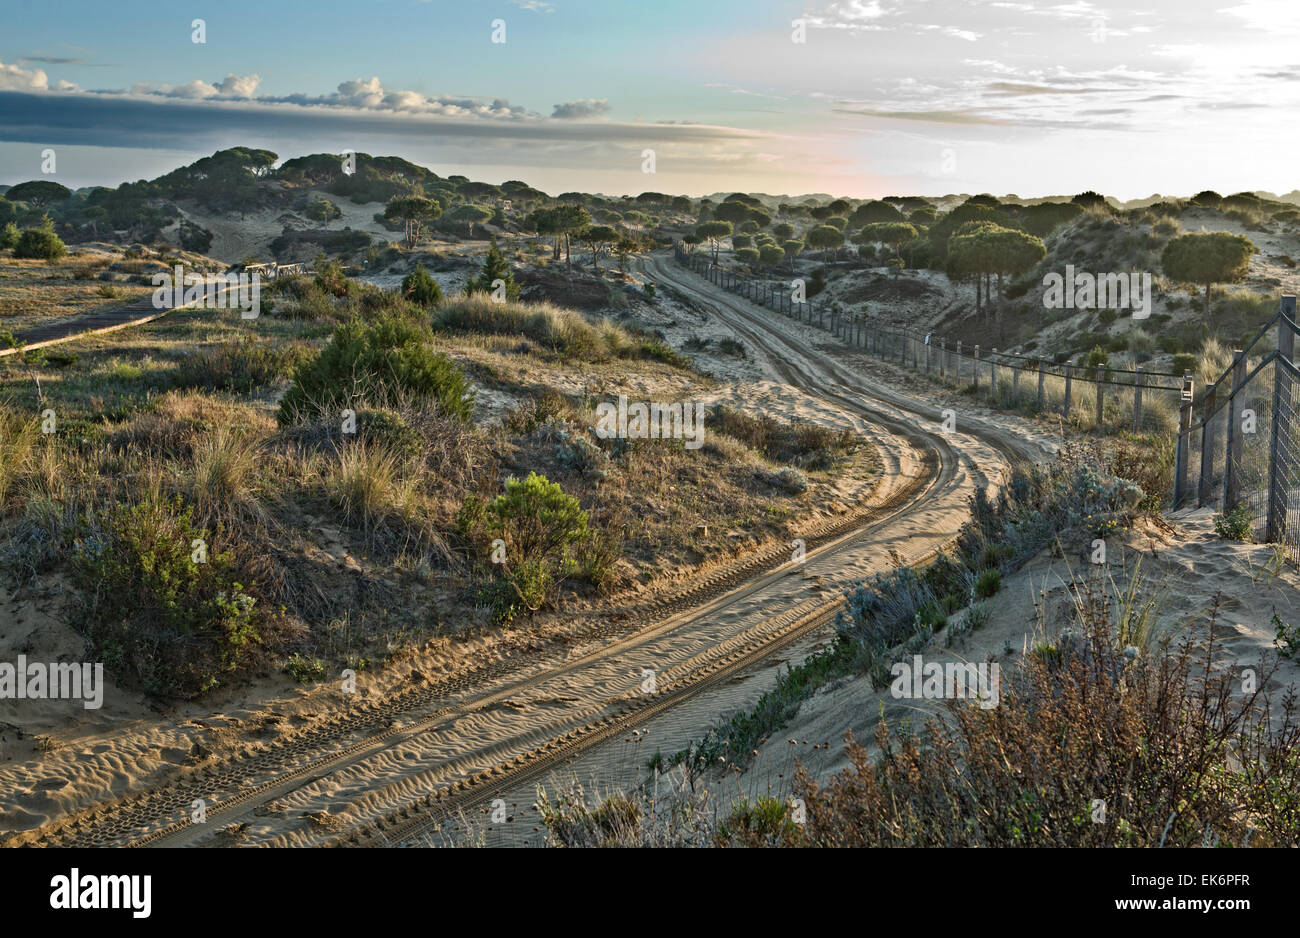 Doñana National Park located in Andalusia covers 543 km². Is an area of marsh, shallow streams, and sand dunes in Las Marismas, Stock Photo